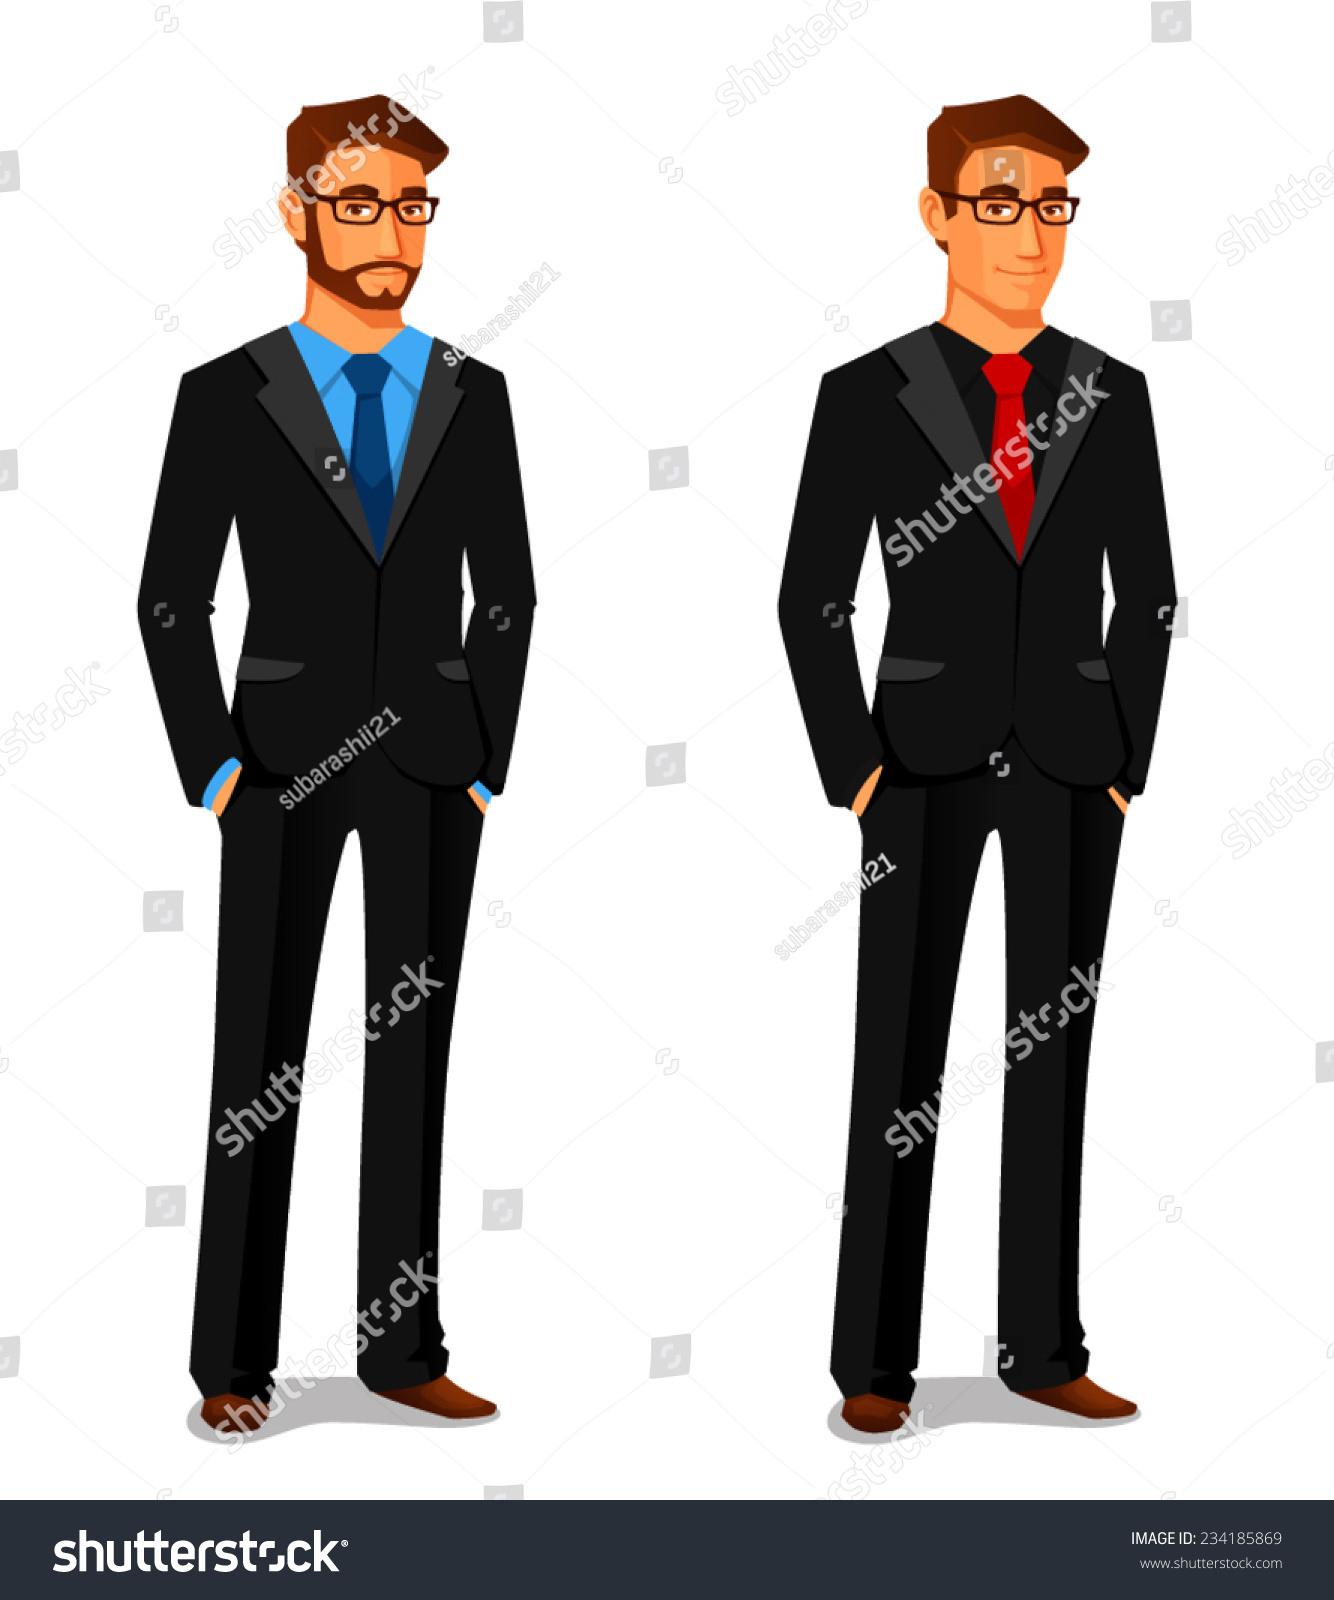 professional clipart collection - photo #34